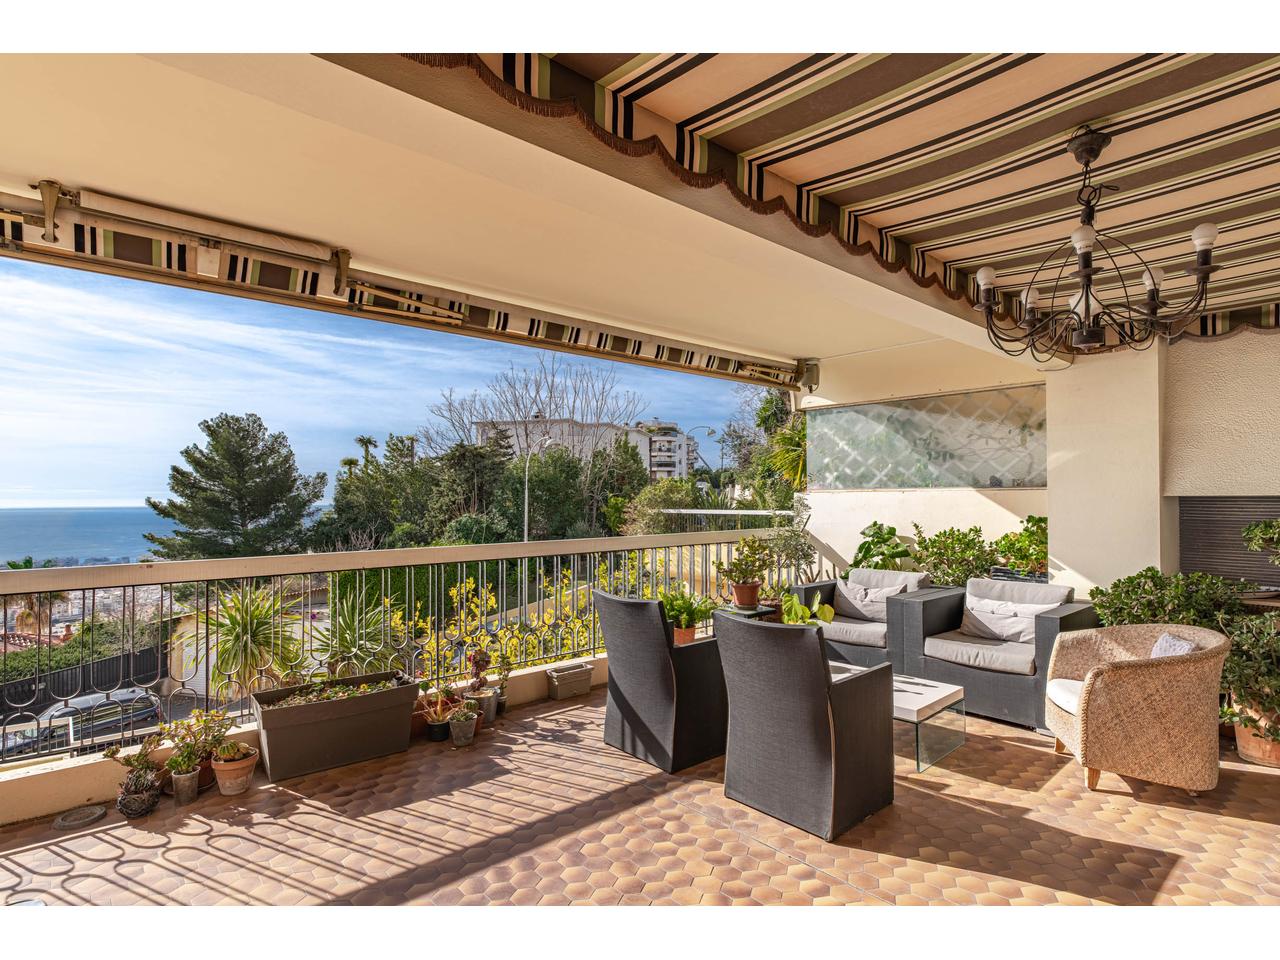 Nice Riviera - Agence Immobiliére Nice Côte d'Azur | Appartement  3 Rooms 109.49m2  for sale   735 000 €